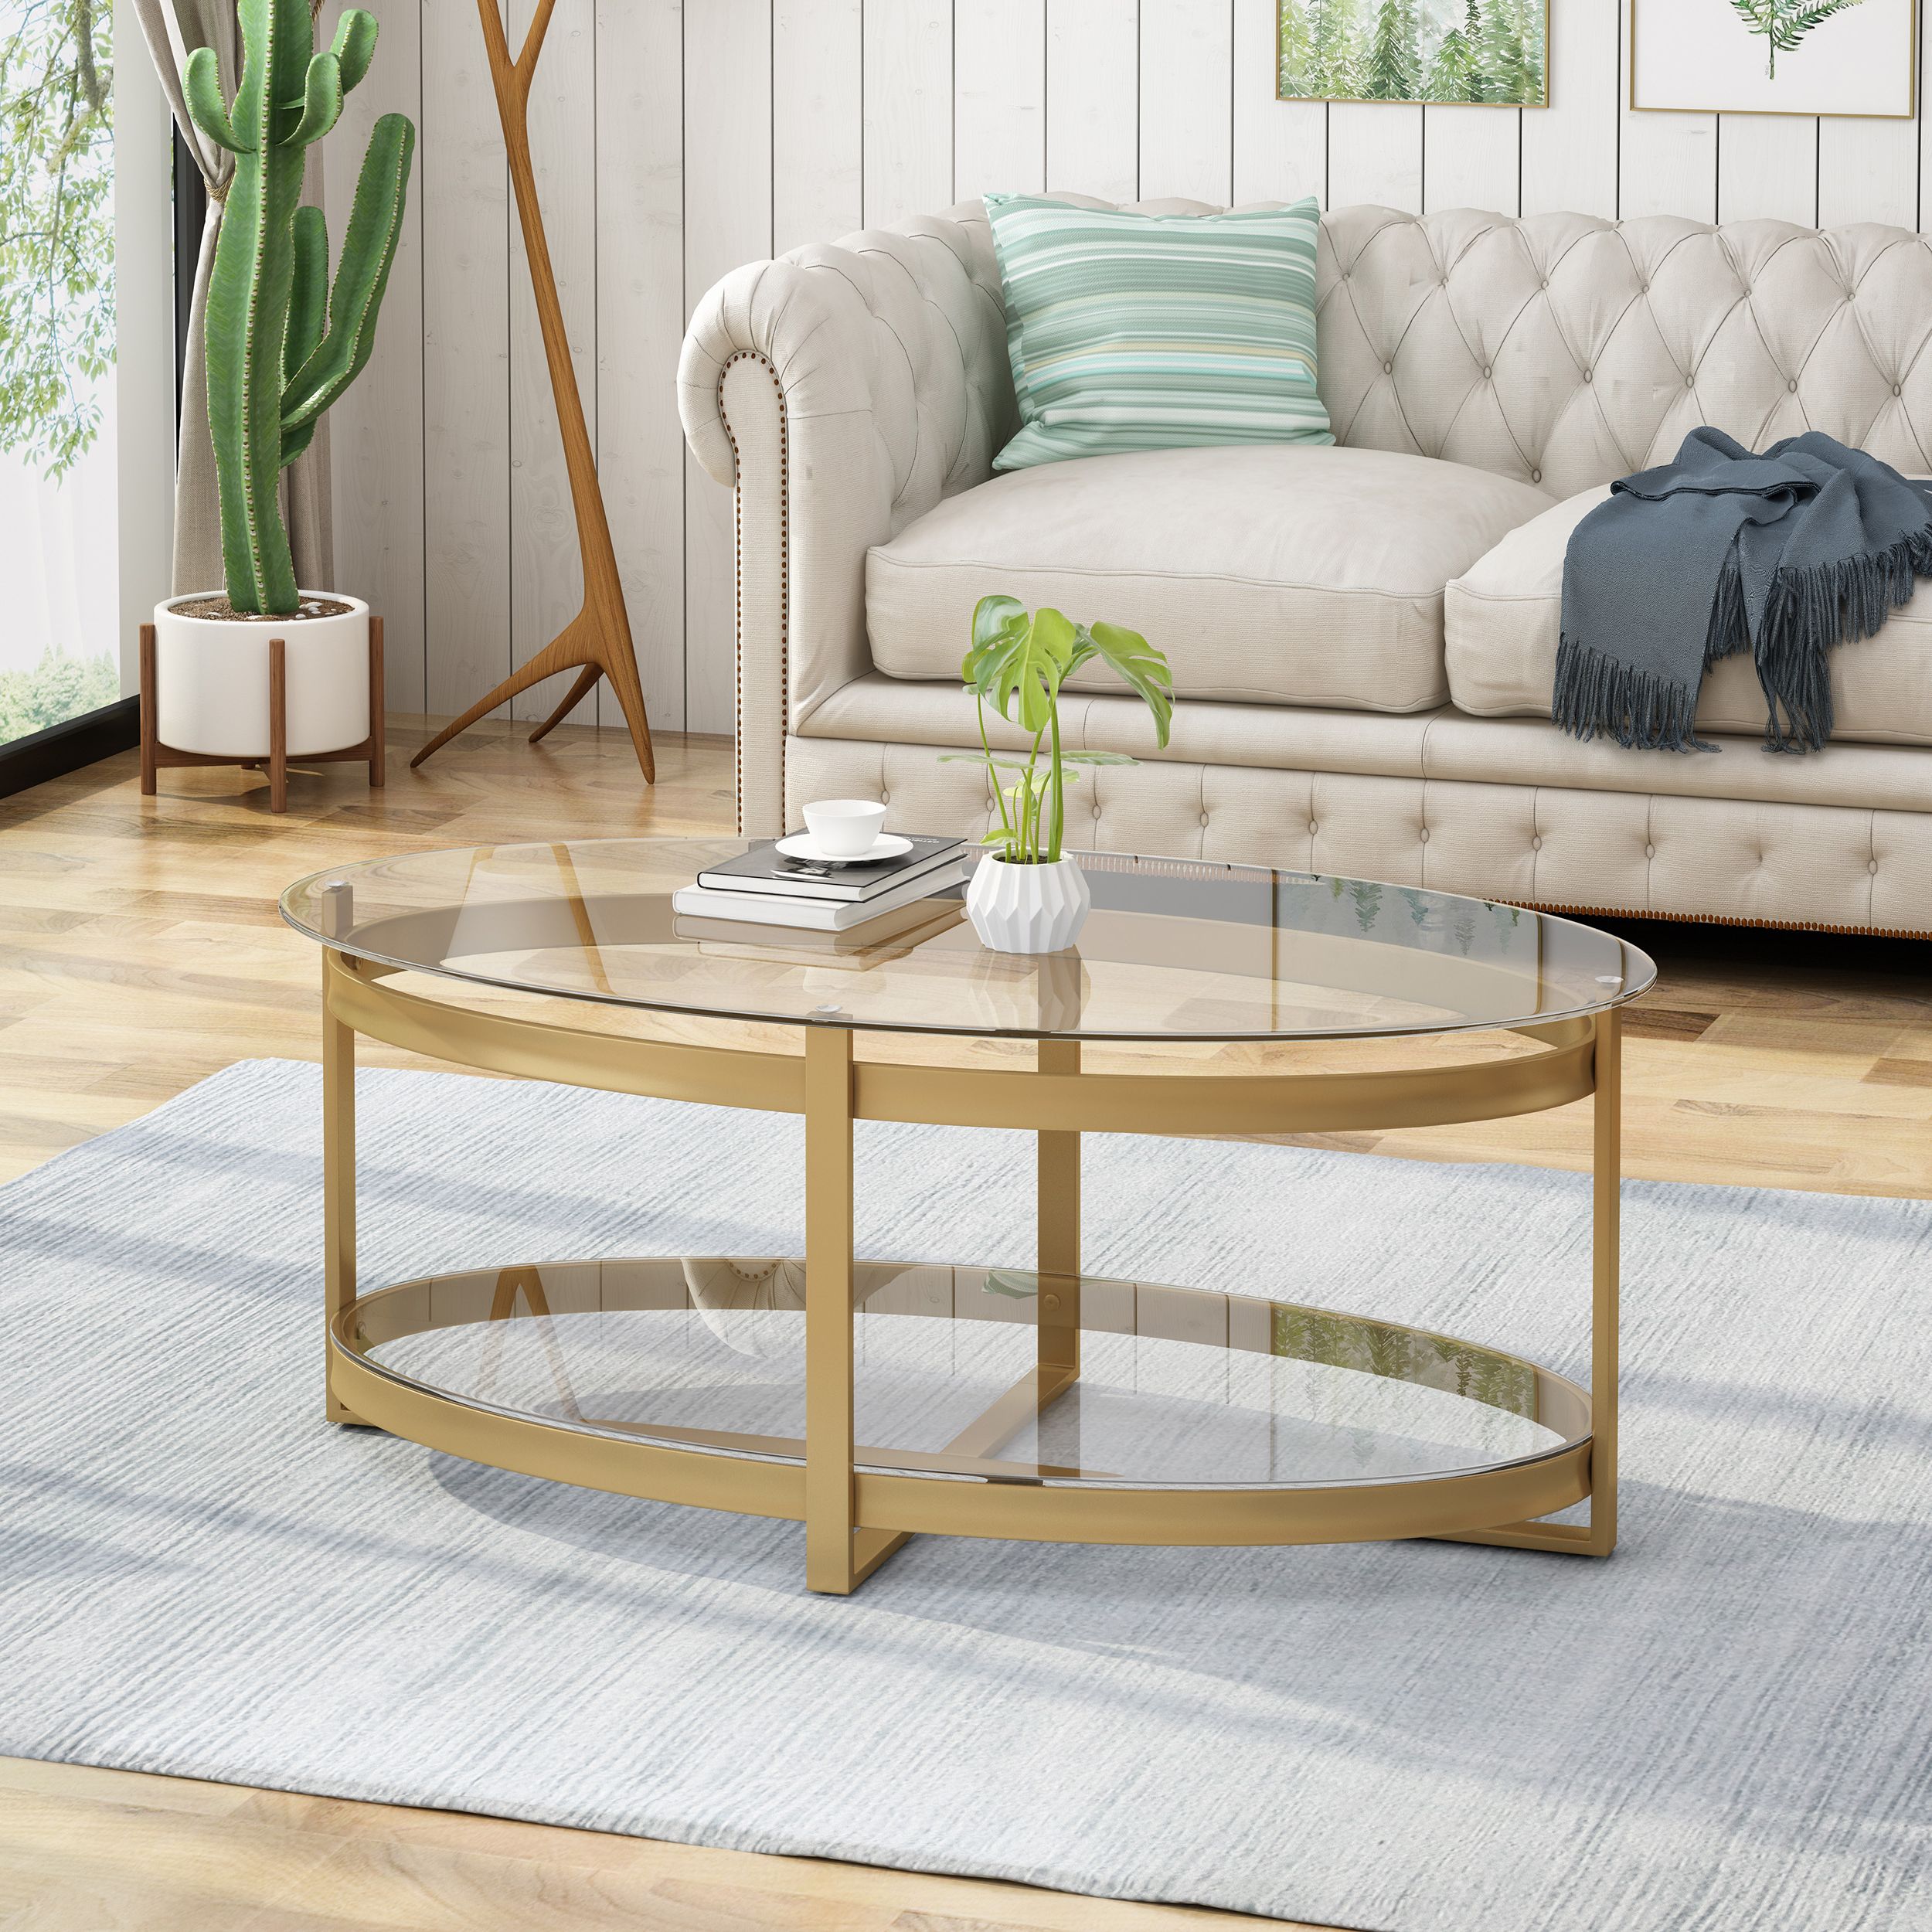 Gdf Studio Bell Modern Glam Tempered Glass Oval Coffee Table, Brass –  Walmart Pertaining To Most Popular Glass Oval Coffee Tables (View 6 of 20)